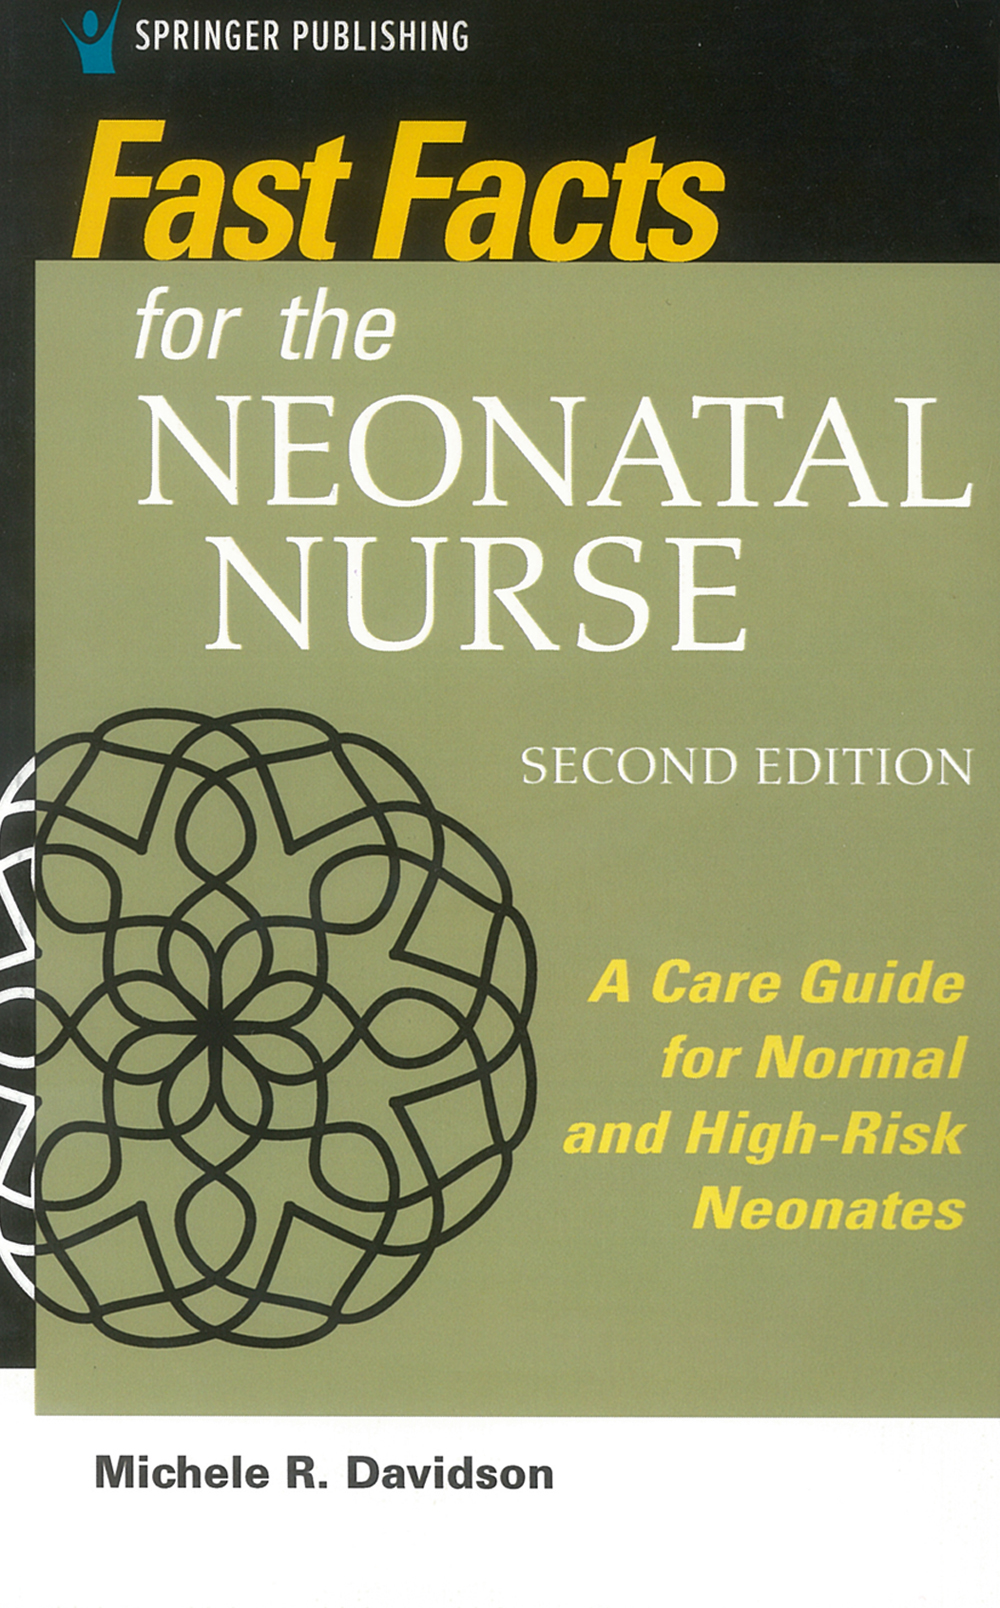 Fast Facts for the Neonatal Nurse, 2nd Ed.